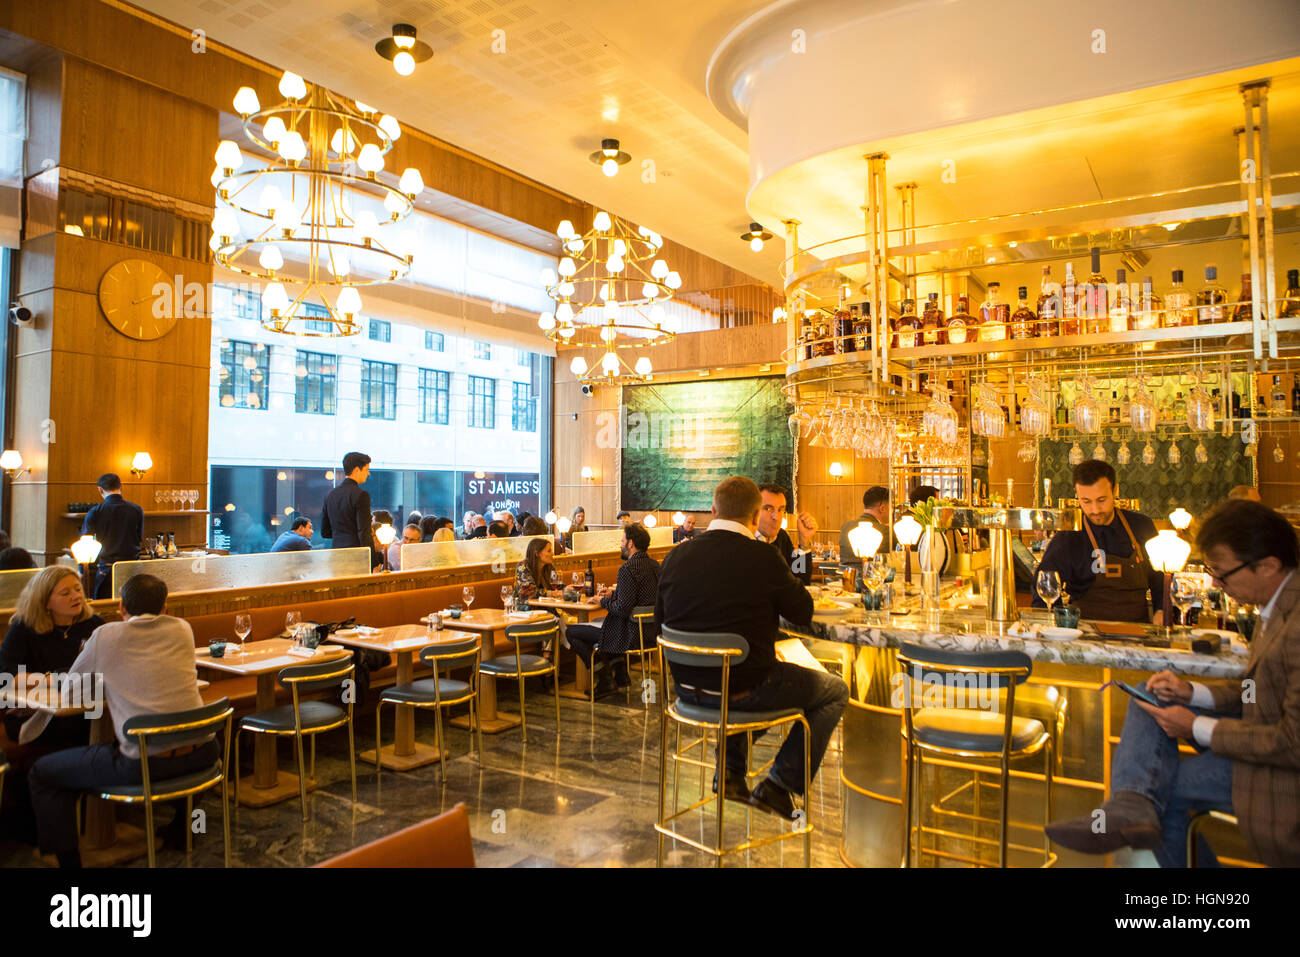 The interior of the restaurant Aquavit in central London. One of the many fine restaurants that are in the city of London Stock Photo